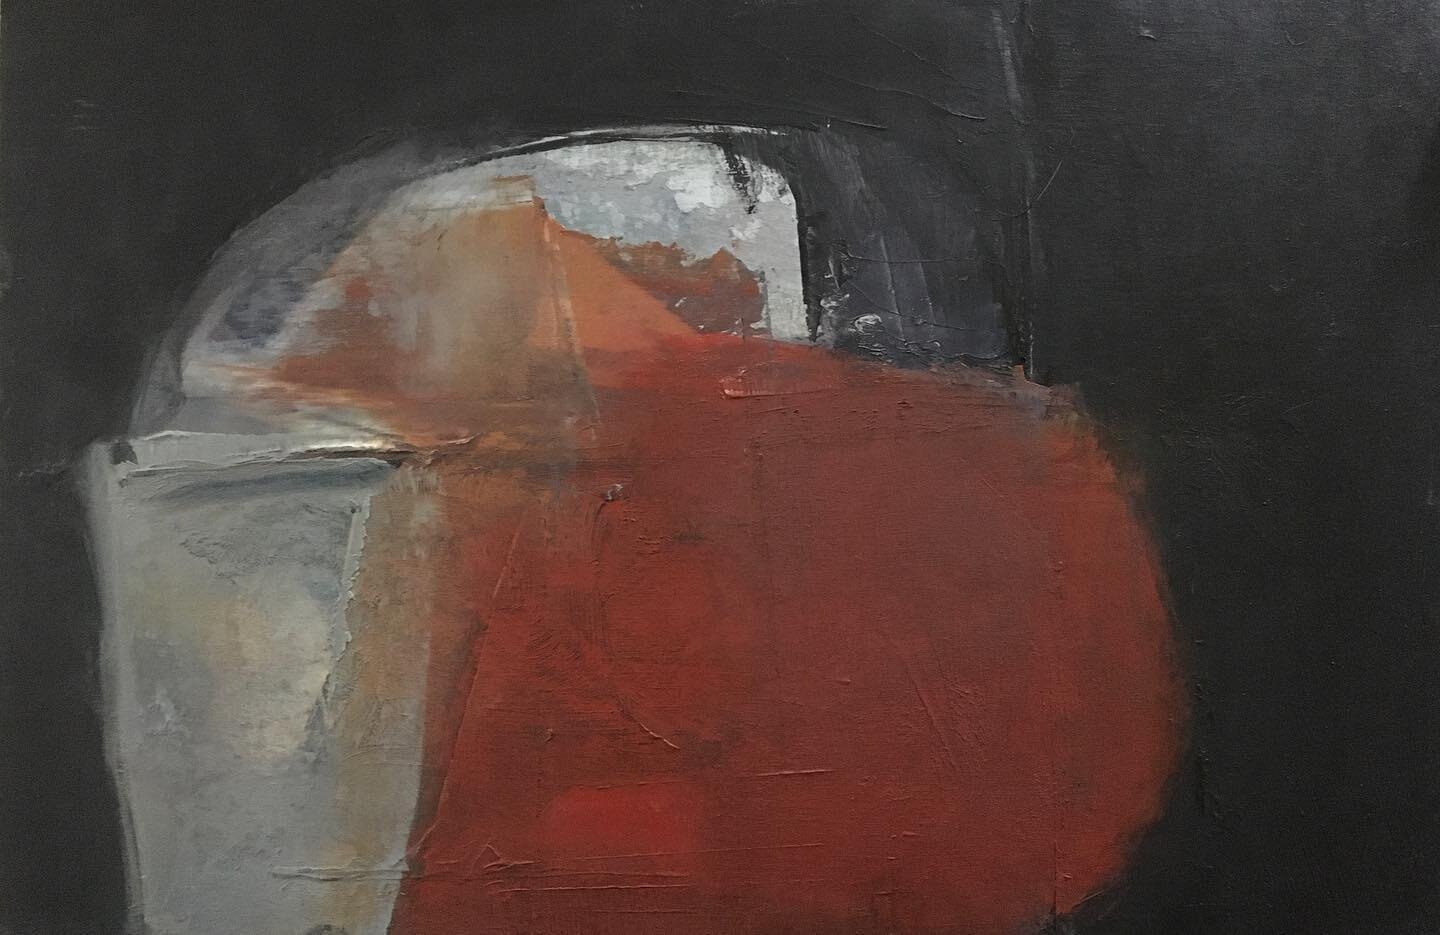 STILL LIFE: WITH TERRACOTTA POT.........Spring on the Horizon...Time to plant seeds. Oil on Board. 25x38cm
More on my website: 
www.louise-holgate.com
All enquiries welcome
#buyartonline
#abstractmag  #highgateart  #janenewberydulwich #chelseaartsclu